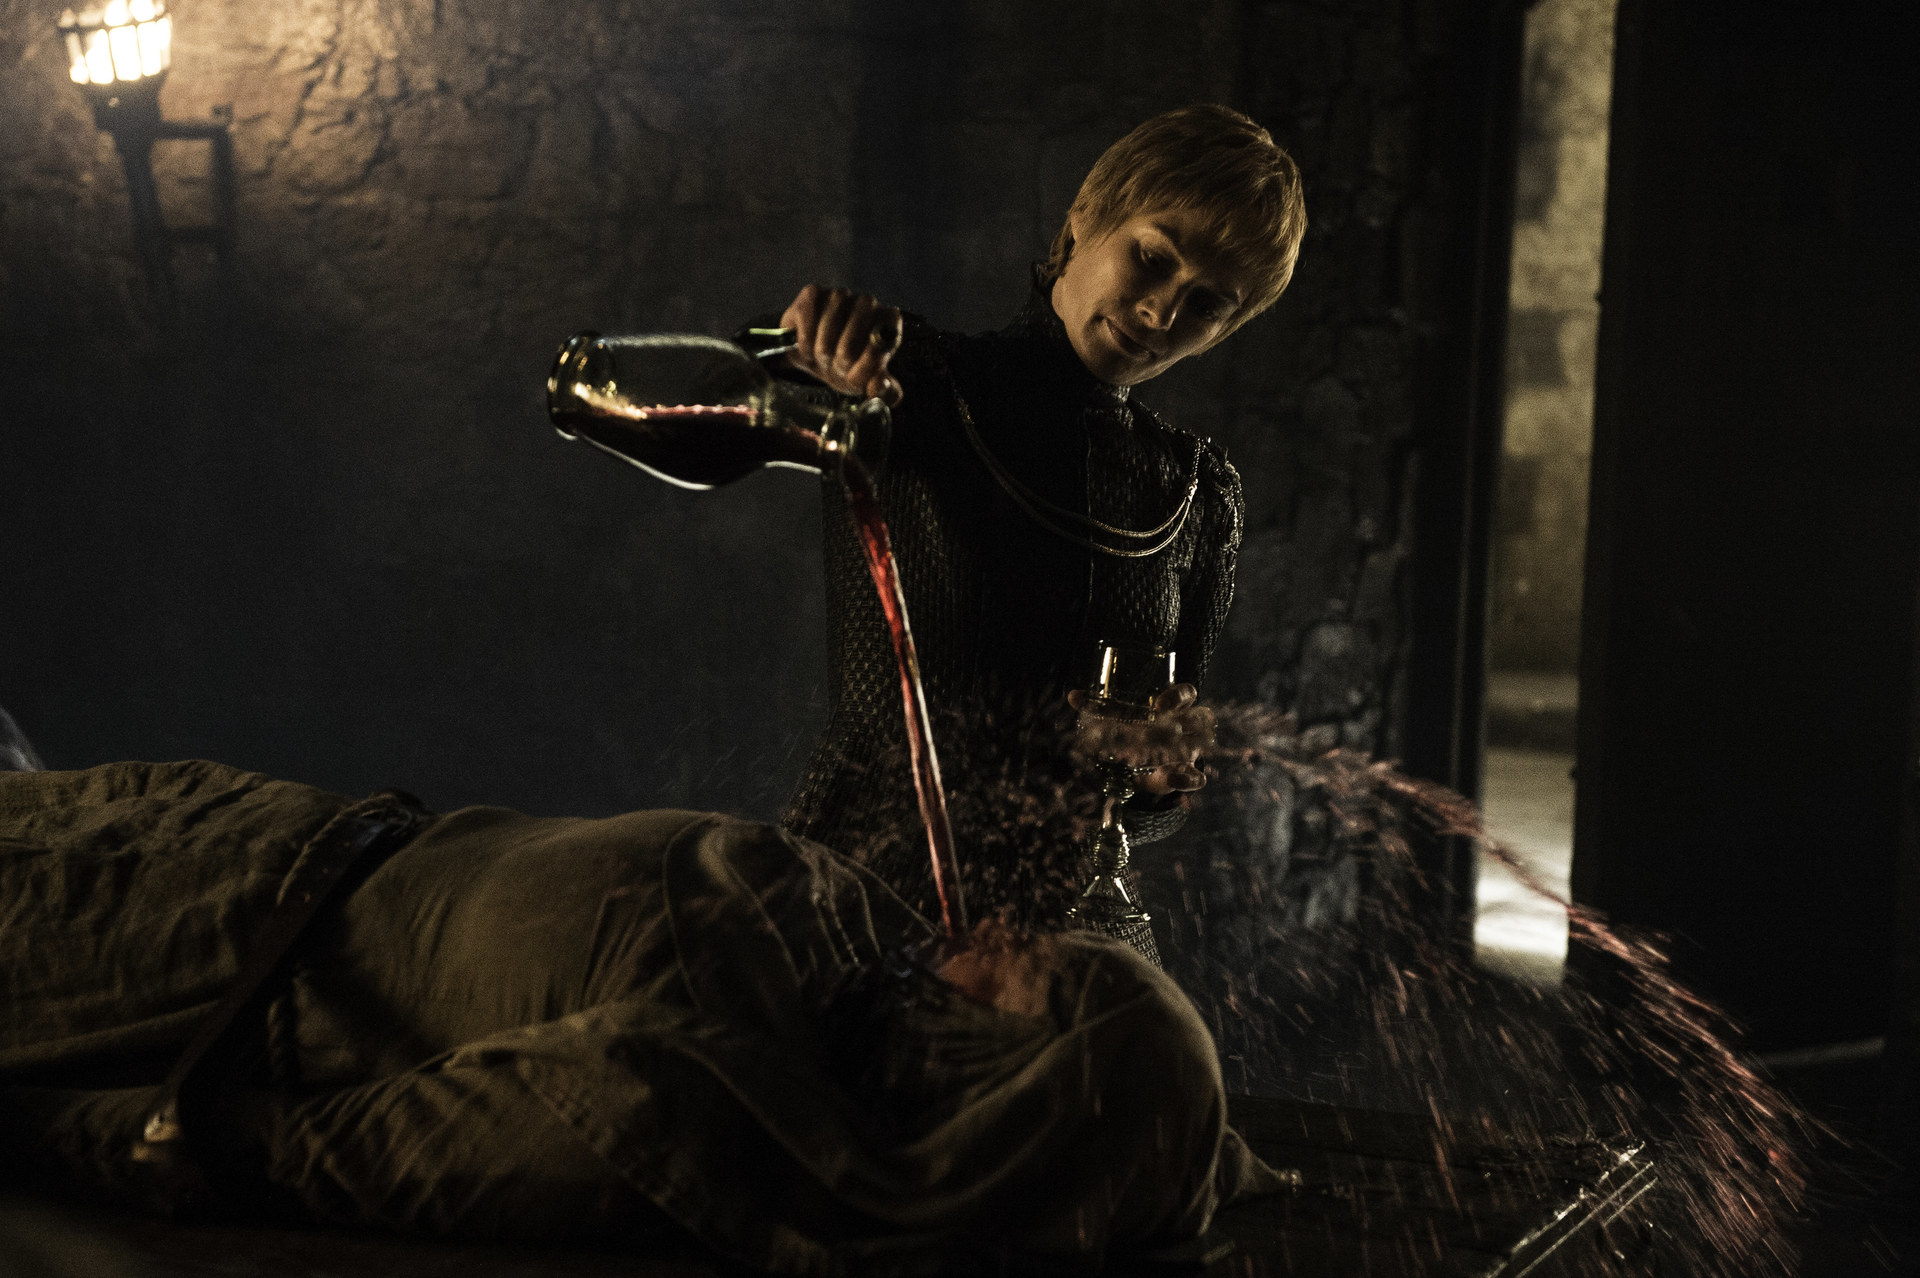 lena headey pouring wine on hannah waddingham in &quot;game of thrones&quot; 